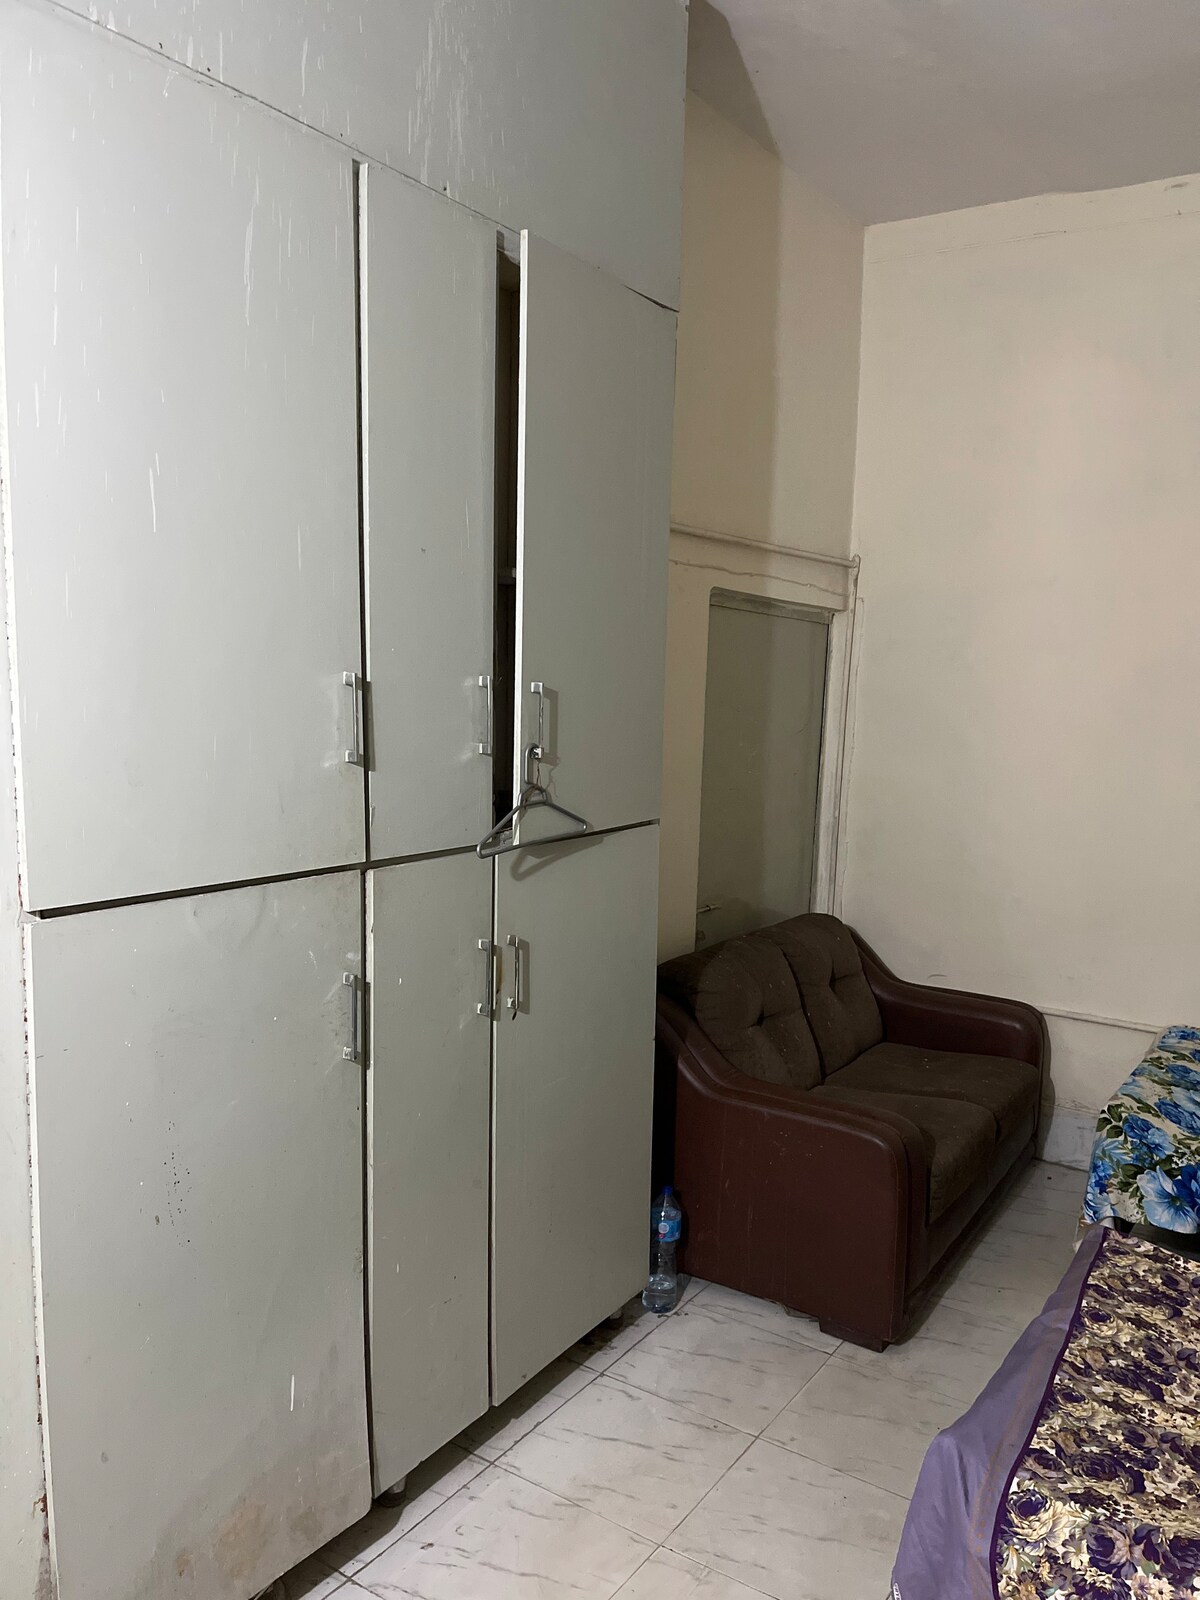 Room in lahore